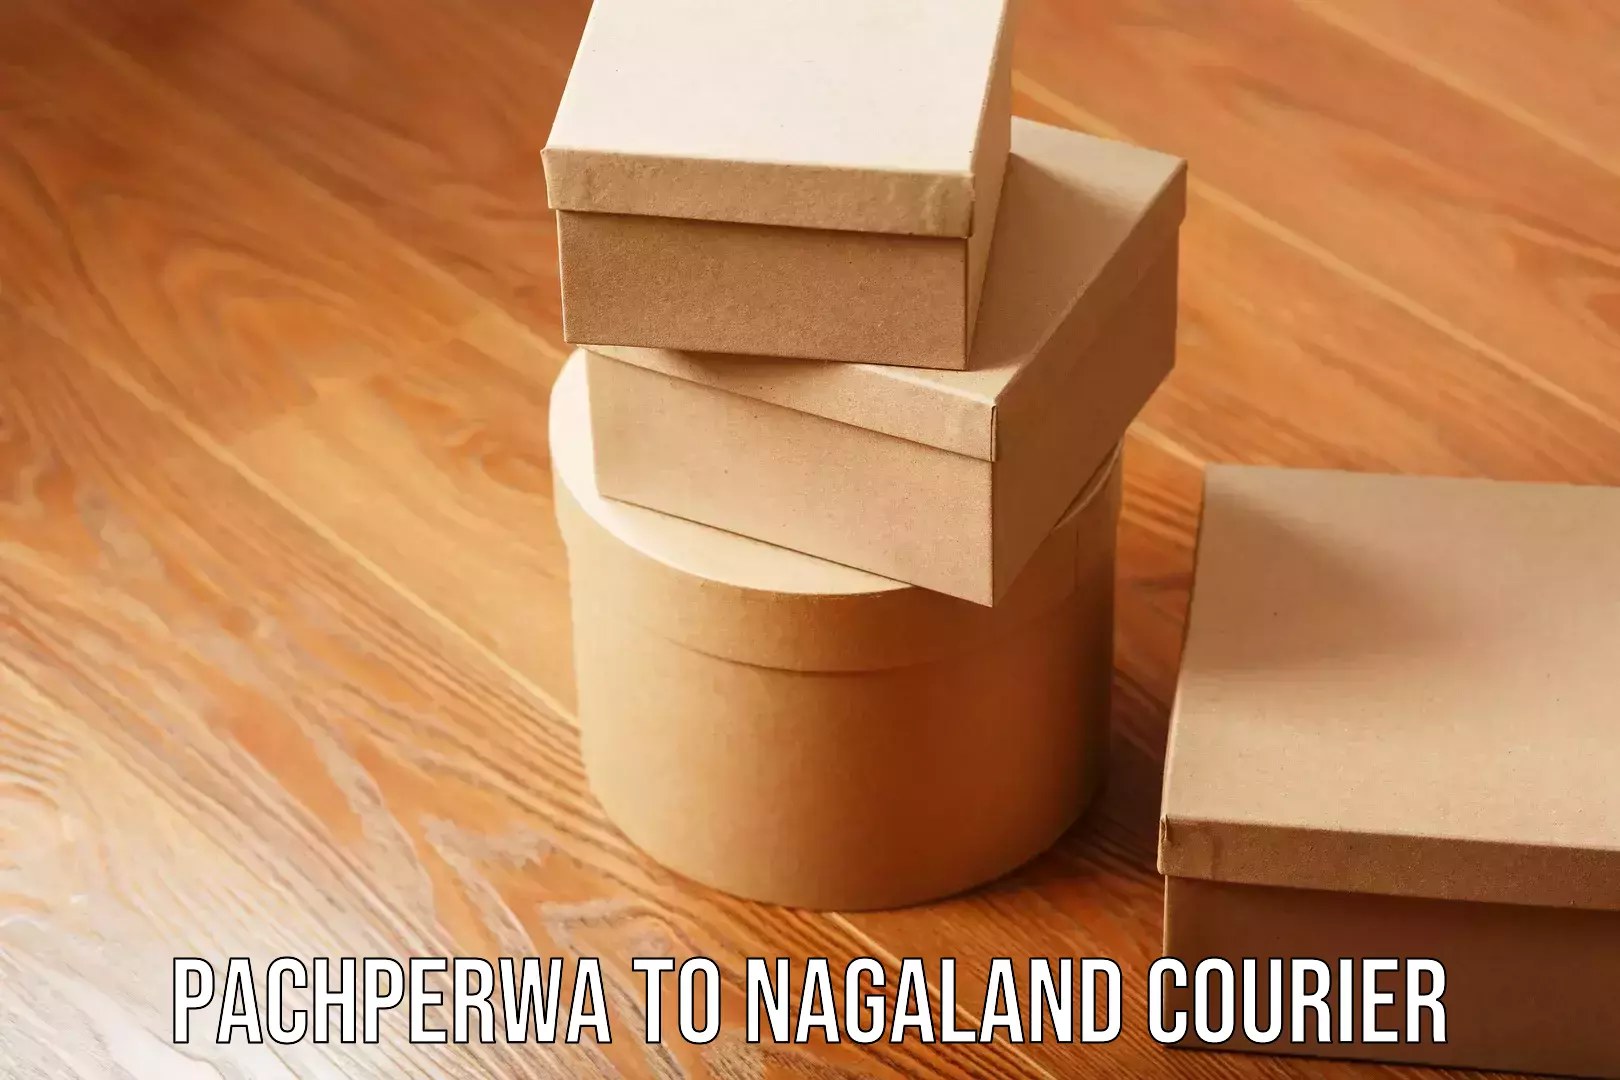 Furniture delivery service Pachperwa to Nagaland